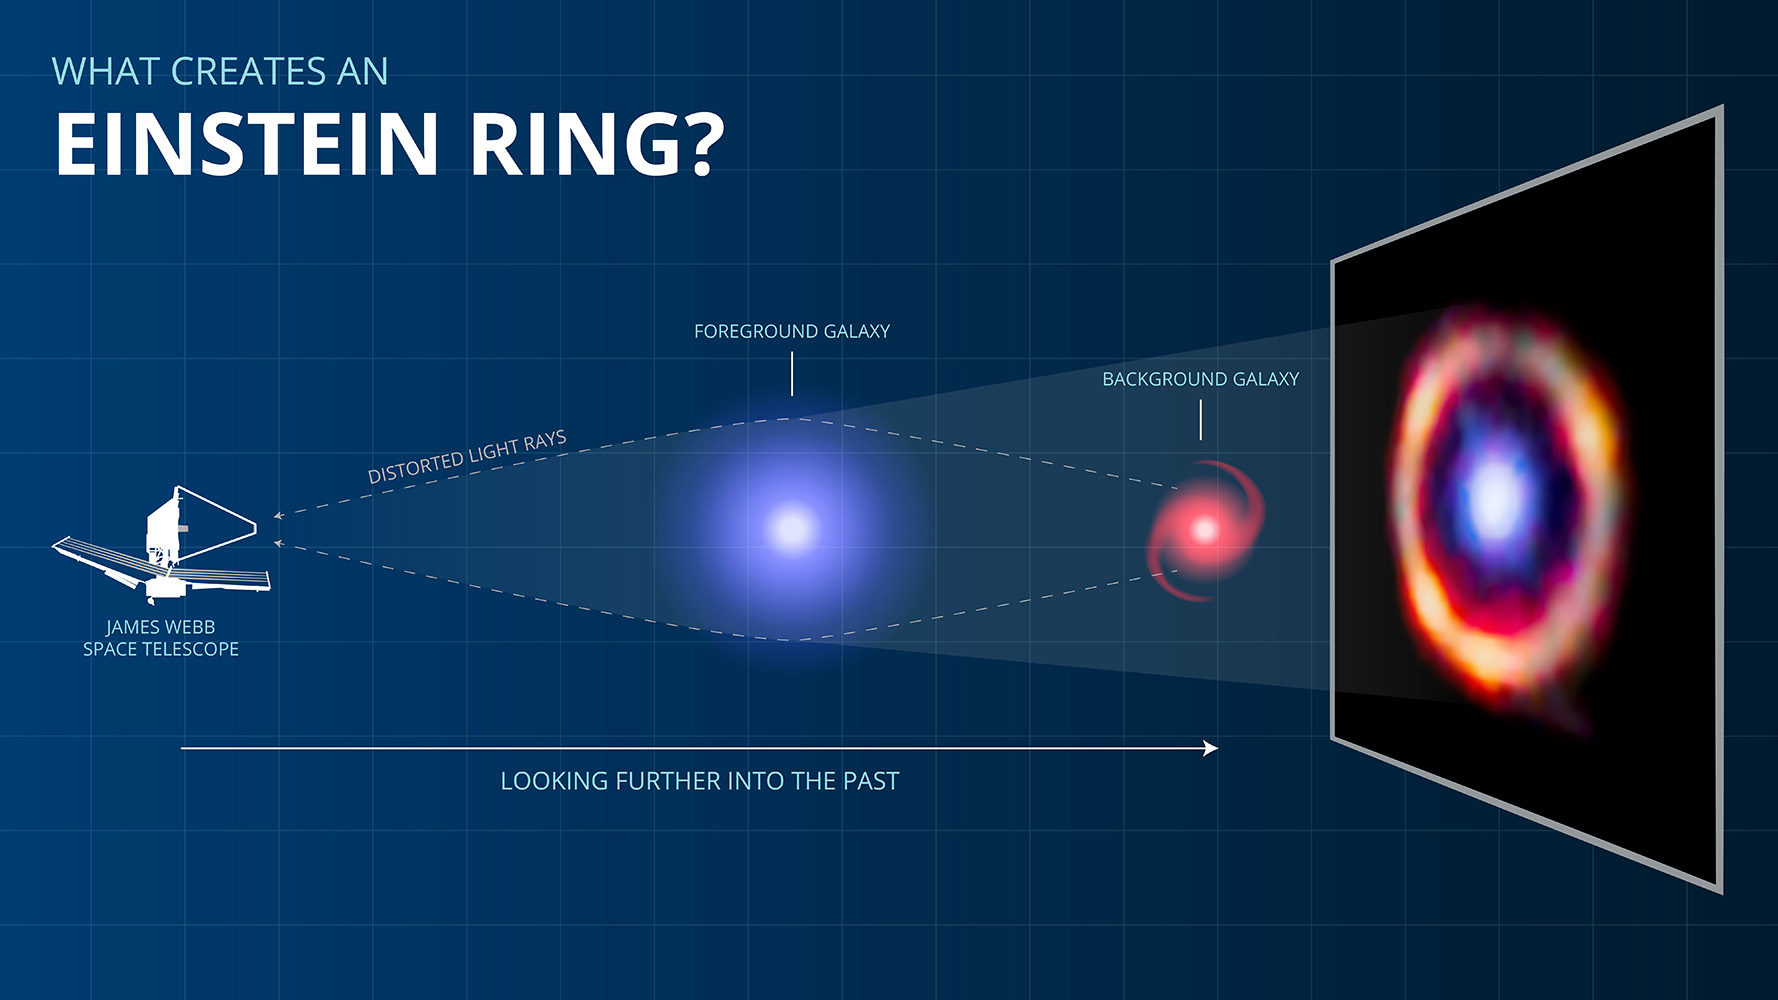 Graphic depicting an Einstein ring and explaining how they occur in the process of galaxy observation